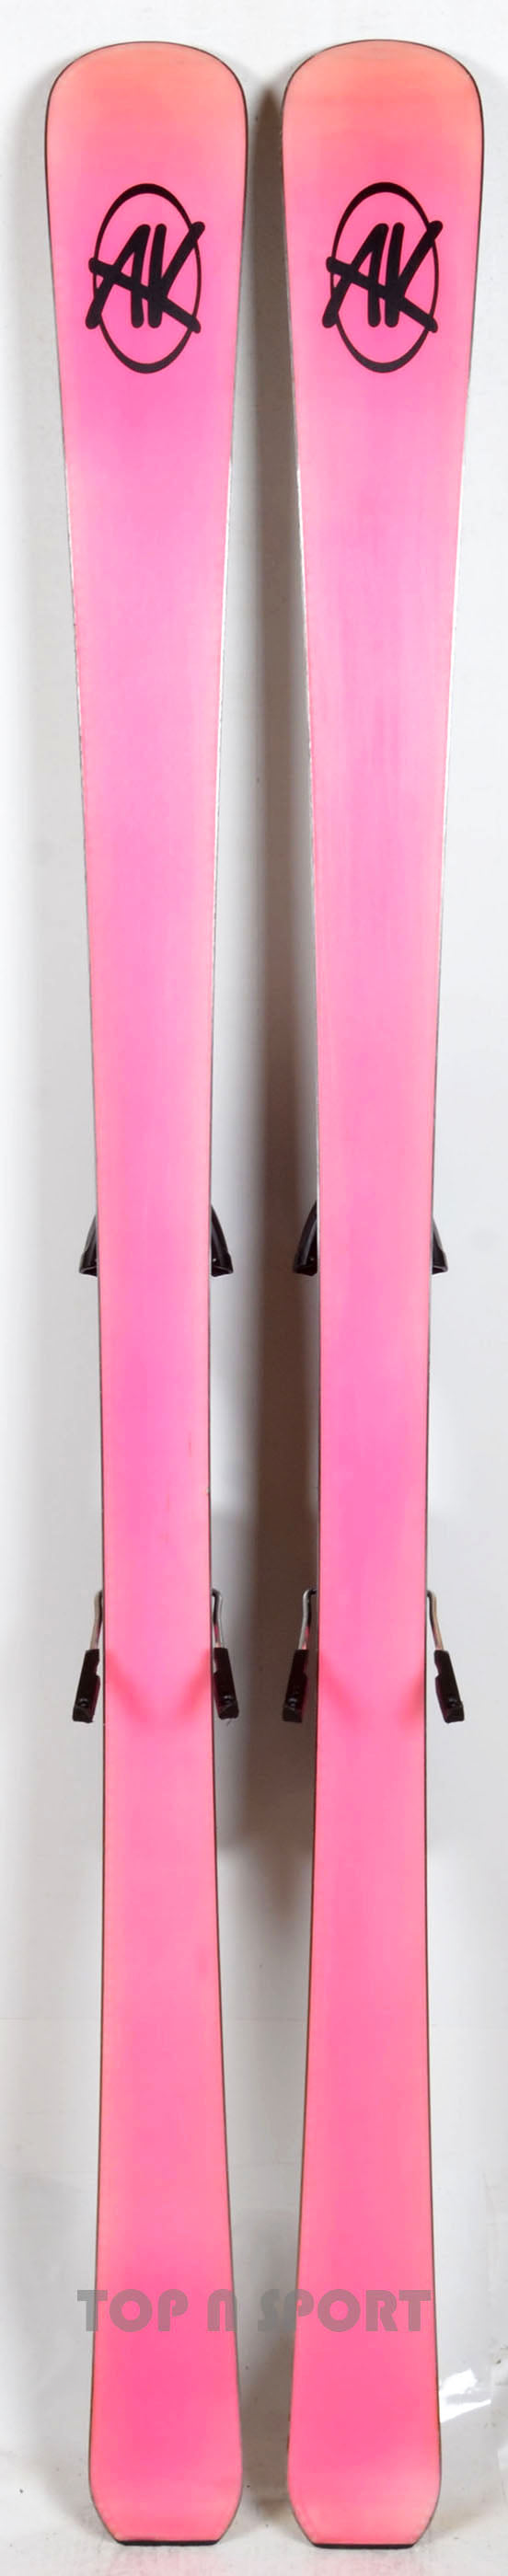 AK PINK - skis d'occasion Femme